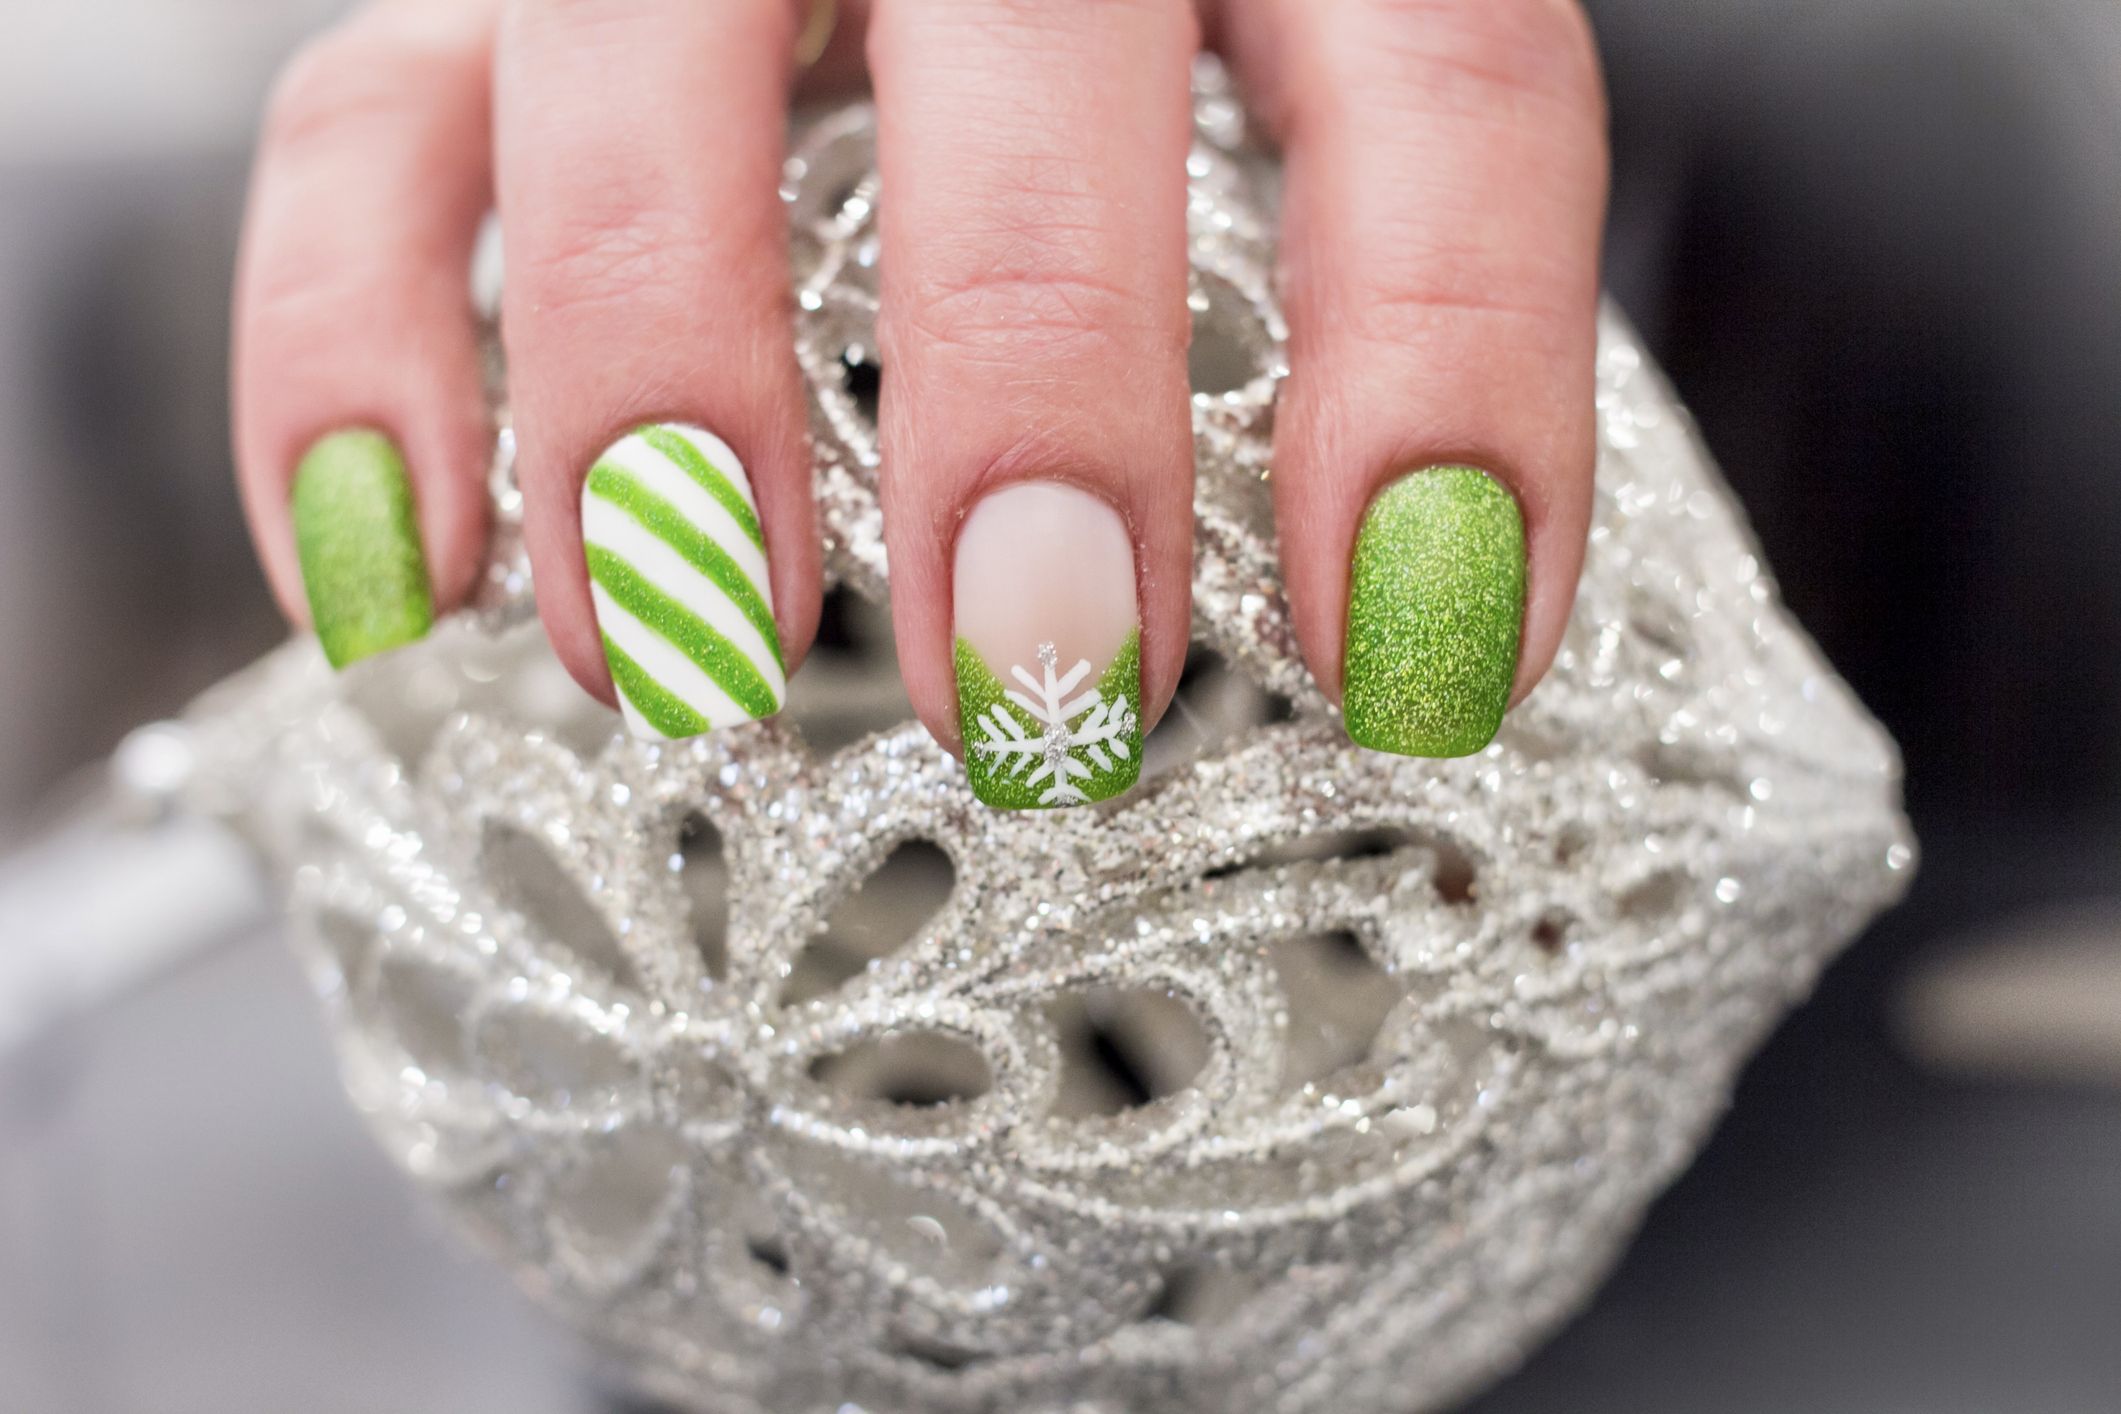 Get Ready for Spring with These Green Nail Art Design Ideas - Click ...